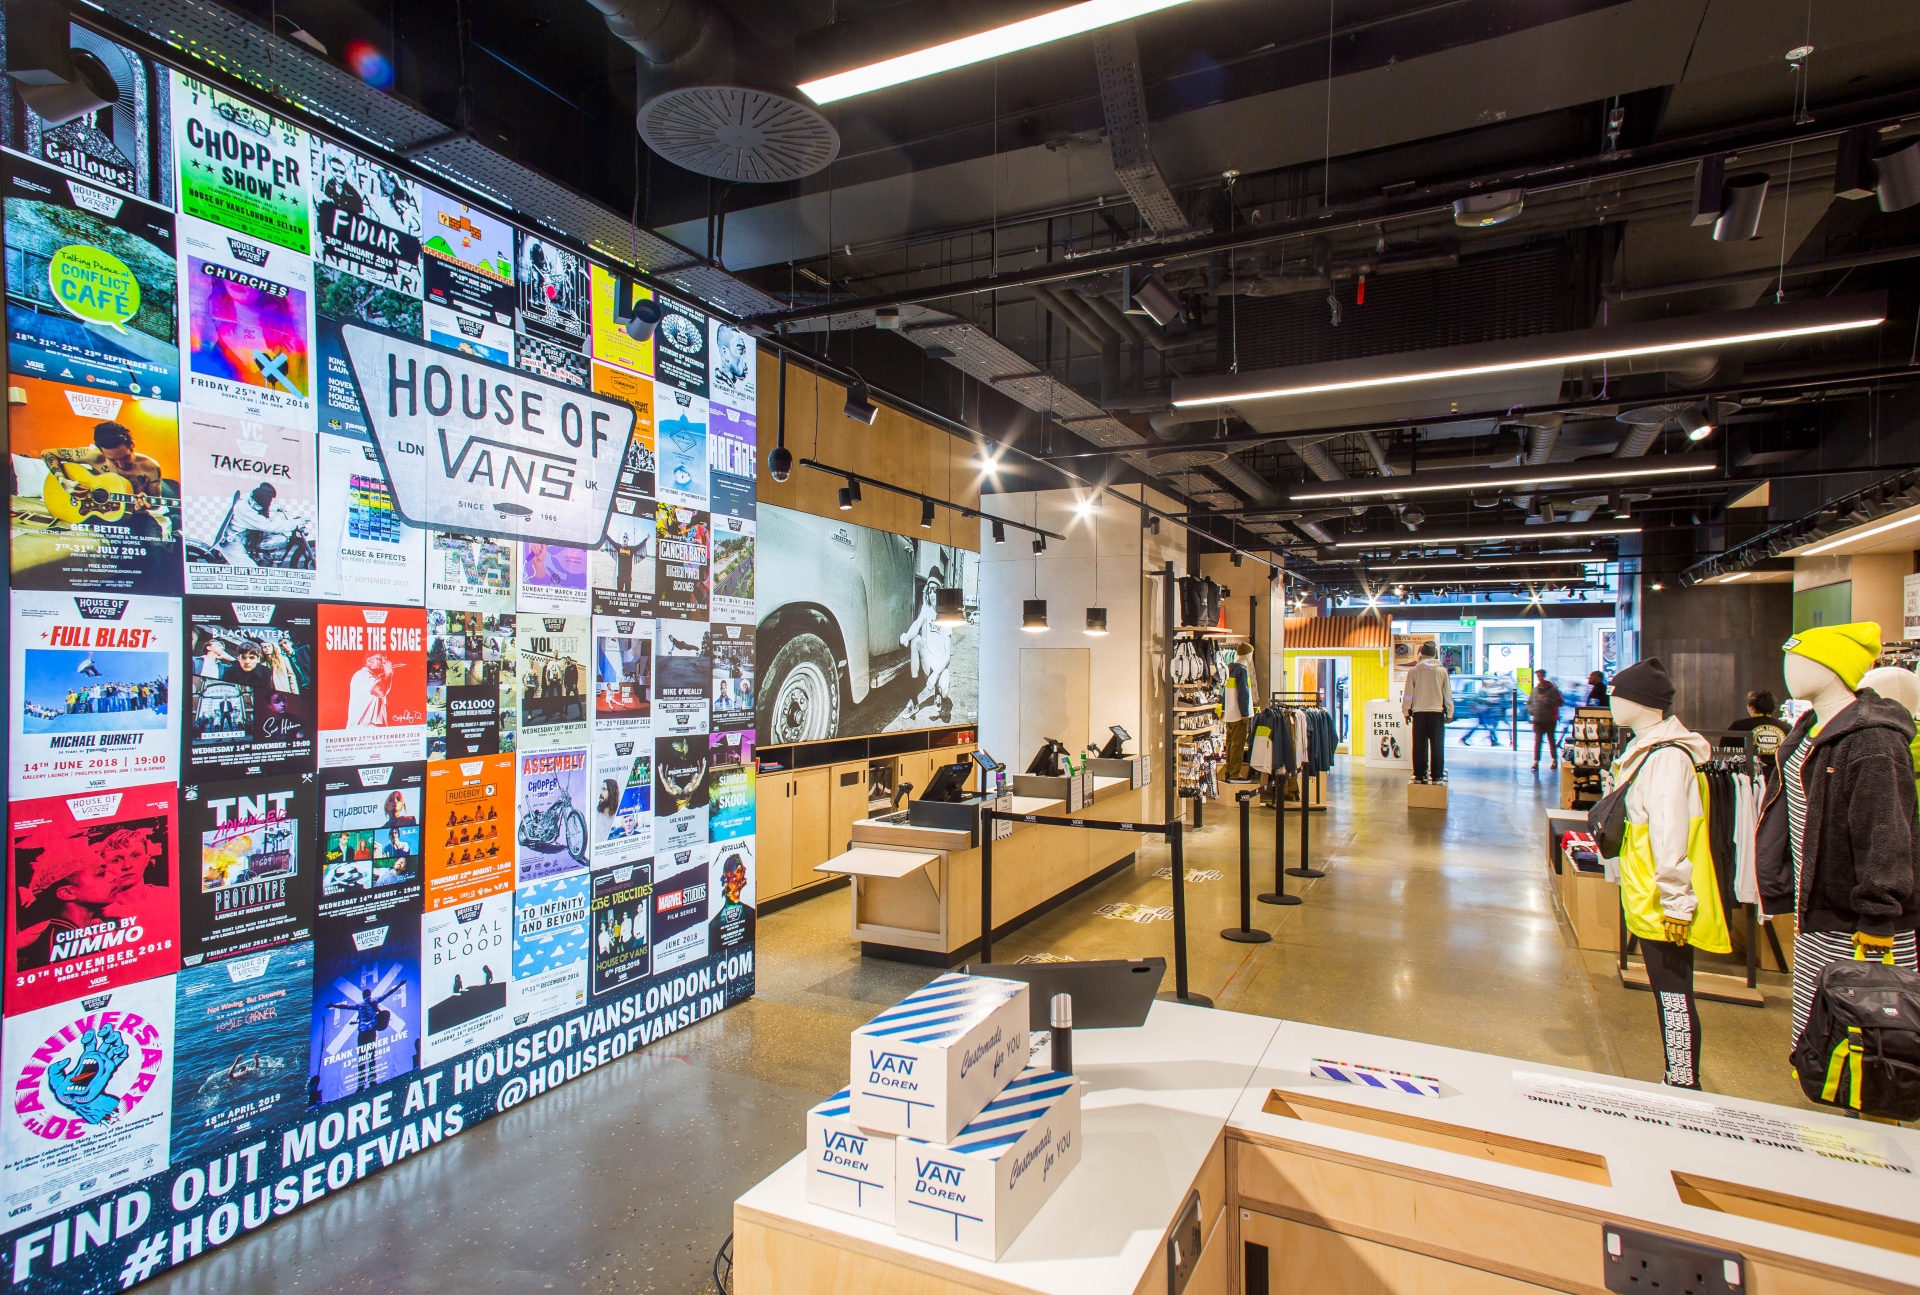 Vans flagship store Customs Lab in London where shoppers can customize their purchases creating positive retail experiences